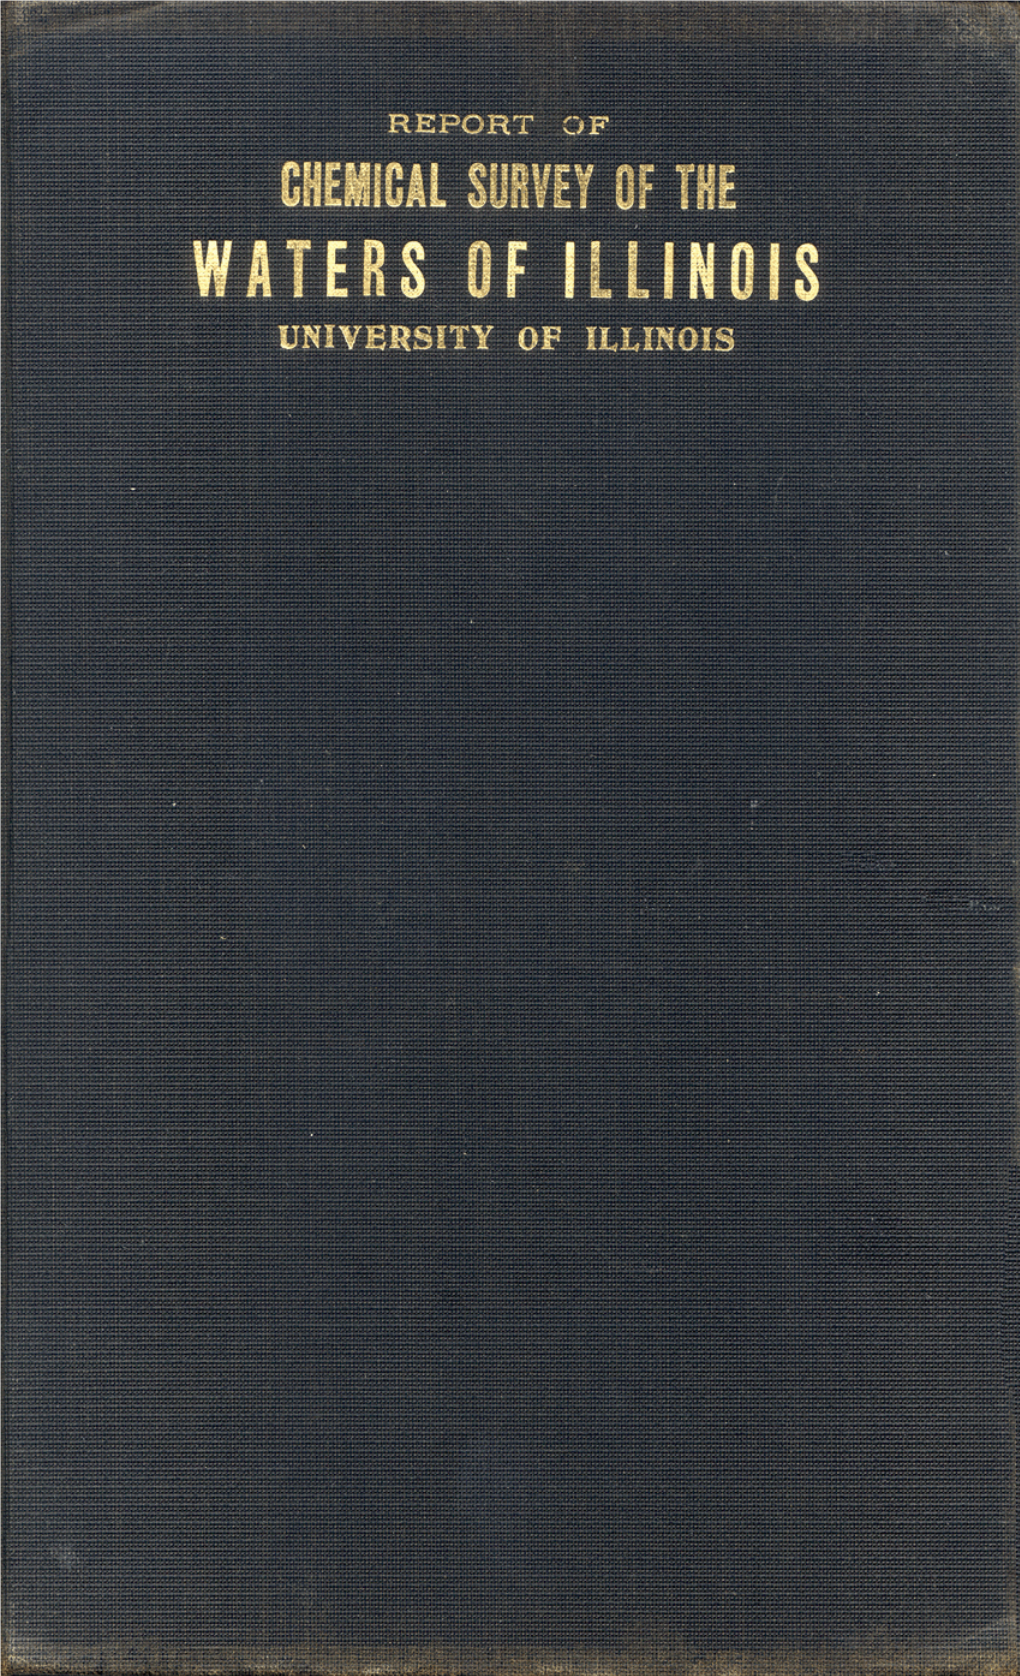 Report of Chemical Survey of the Waters of Illinois, University of Illinois